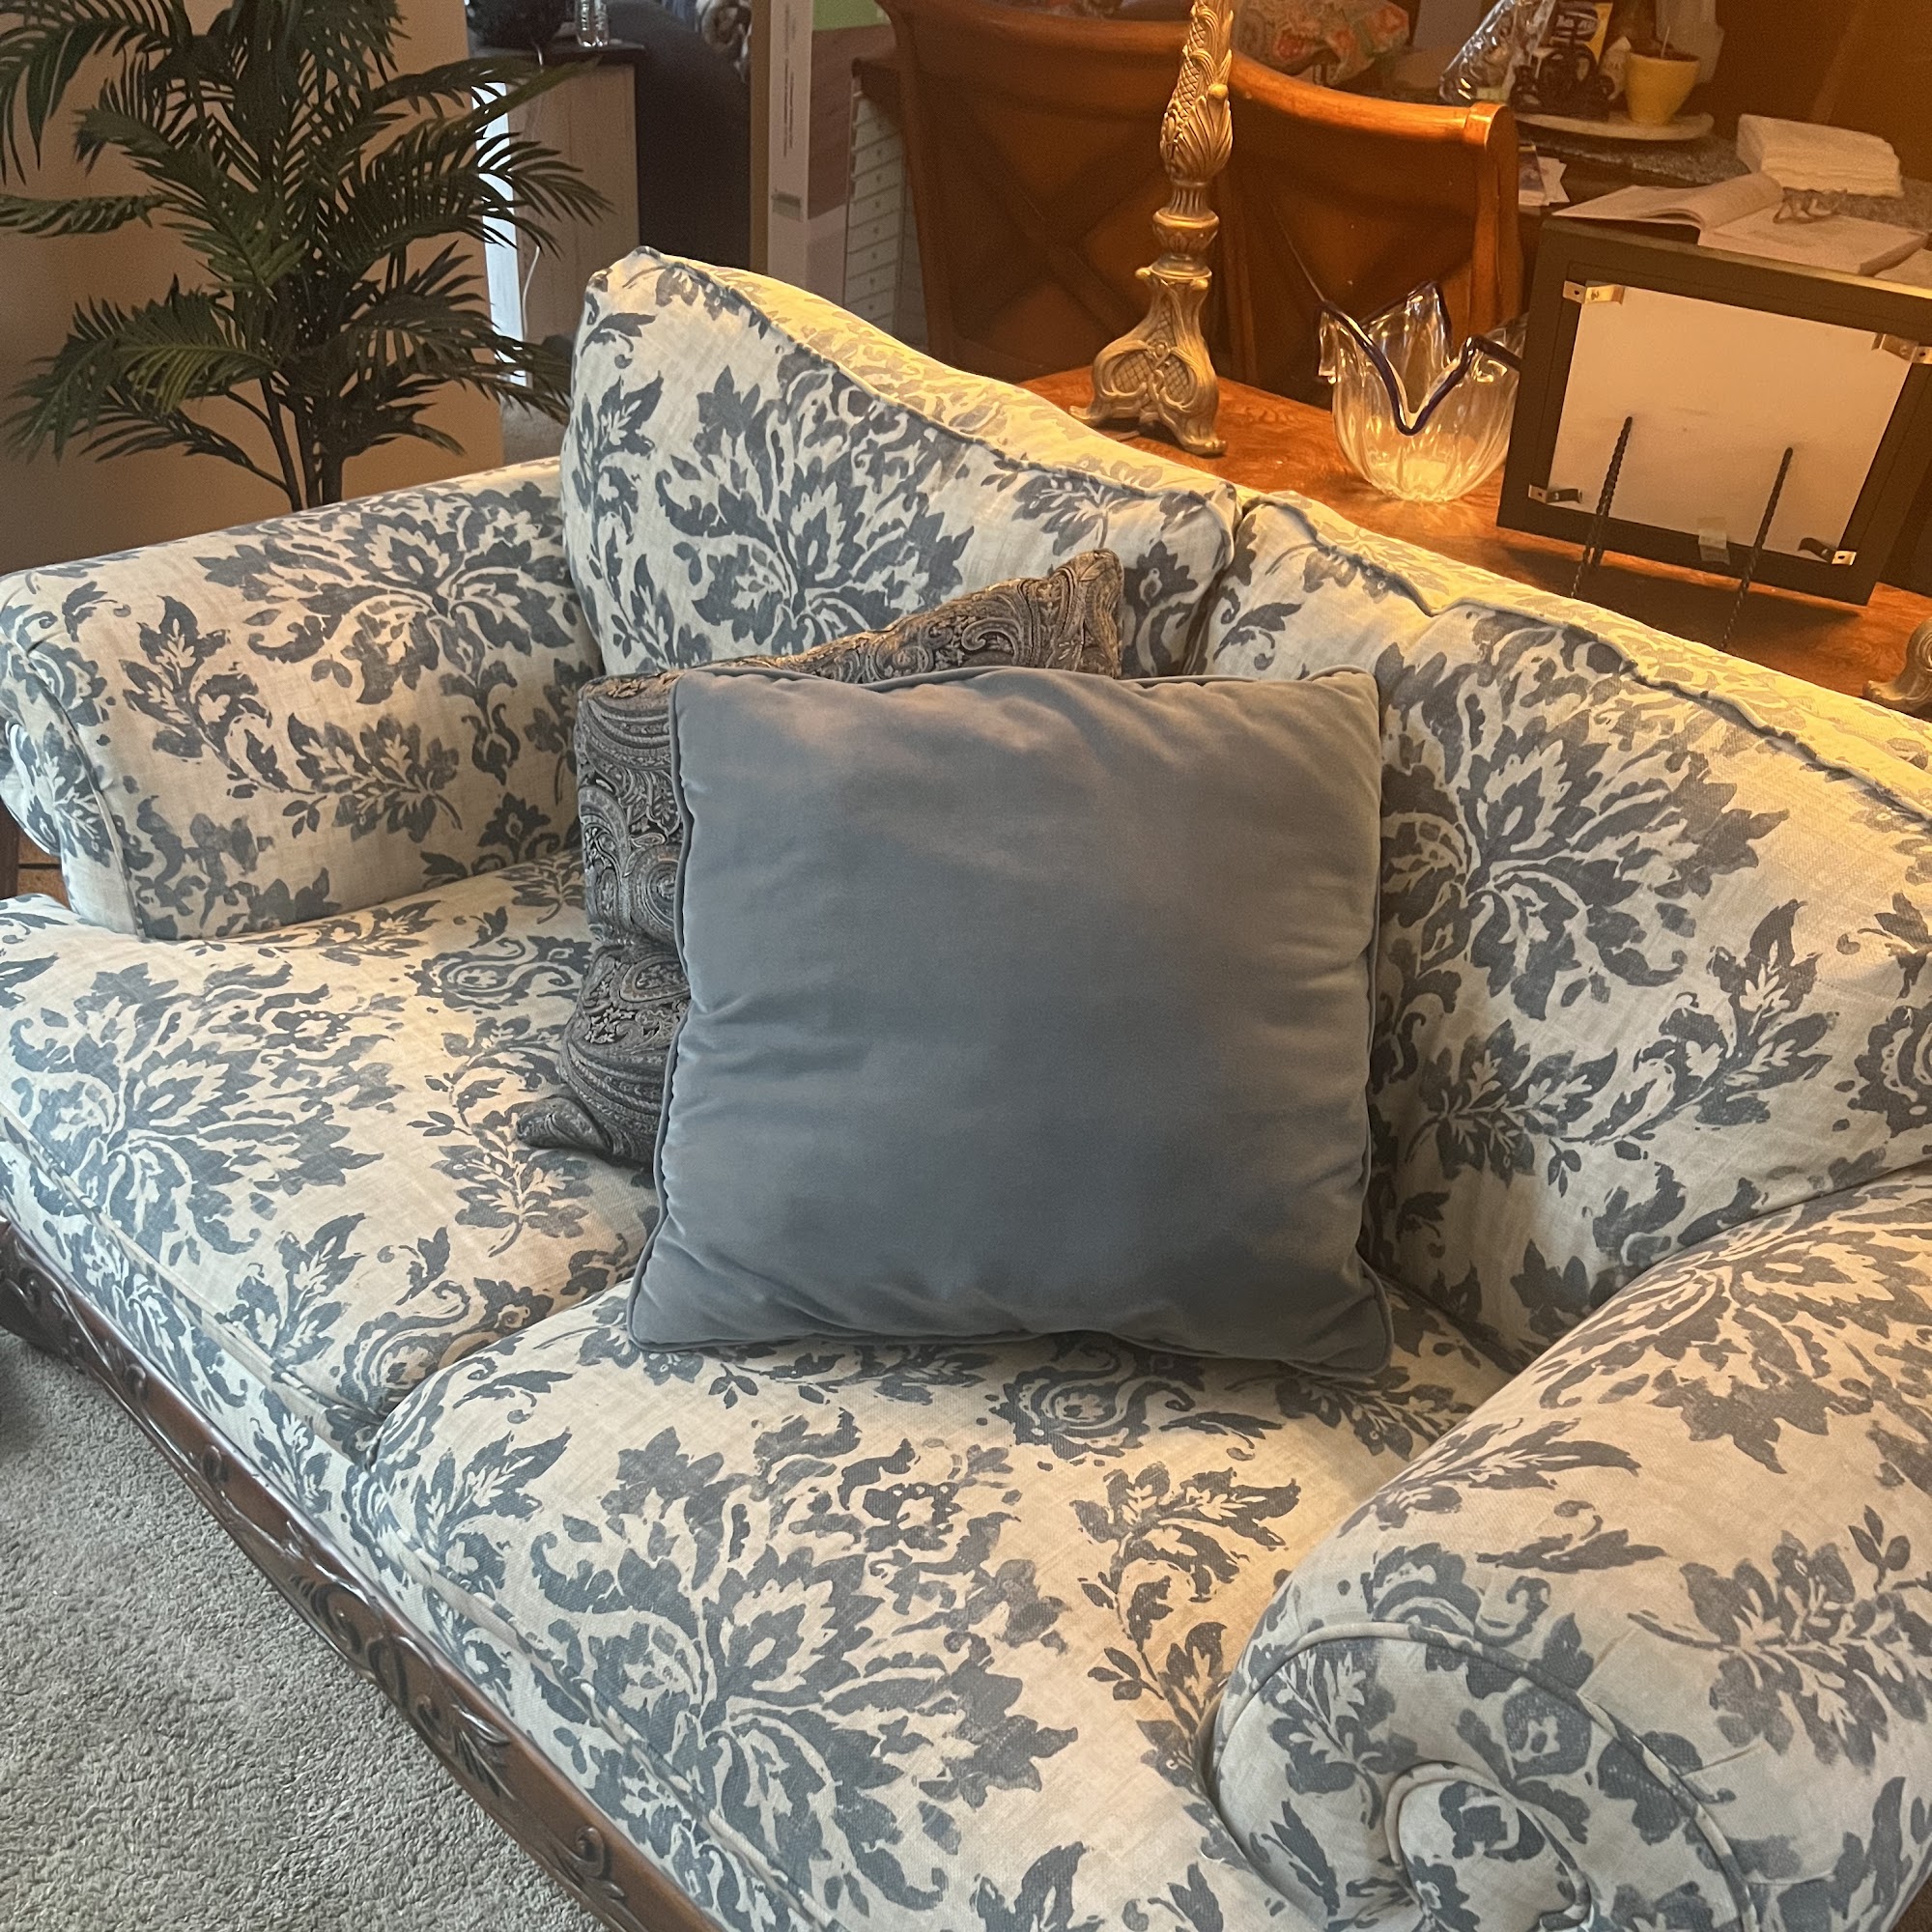 Upholstery & Furniture Repair in Plymouth, MN at Niola Furniture Upholstery